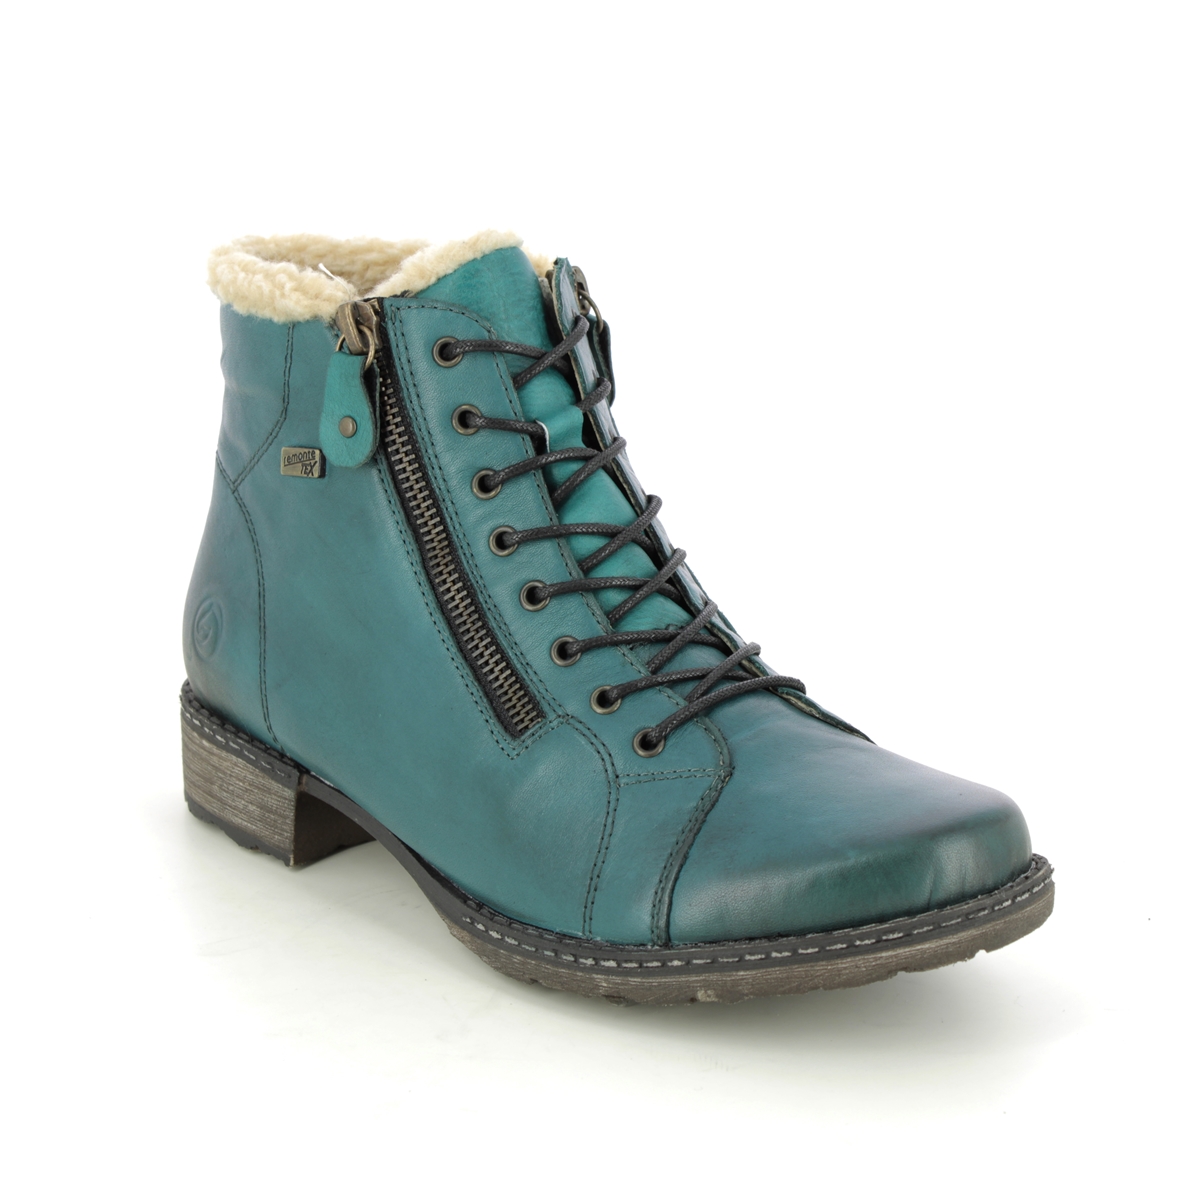 Remonte Peesienna Tex Turquoise Leather Womens Lace Up Boots D4372-12 In Size 39 In Plain Turquoise Leather